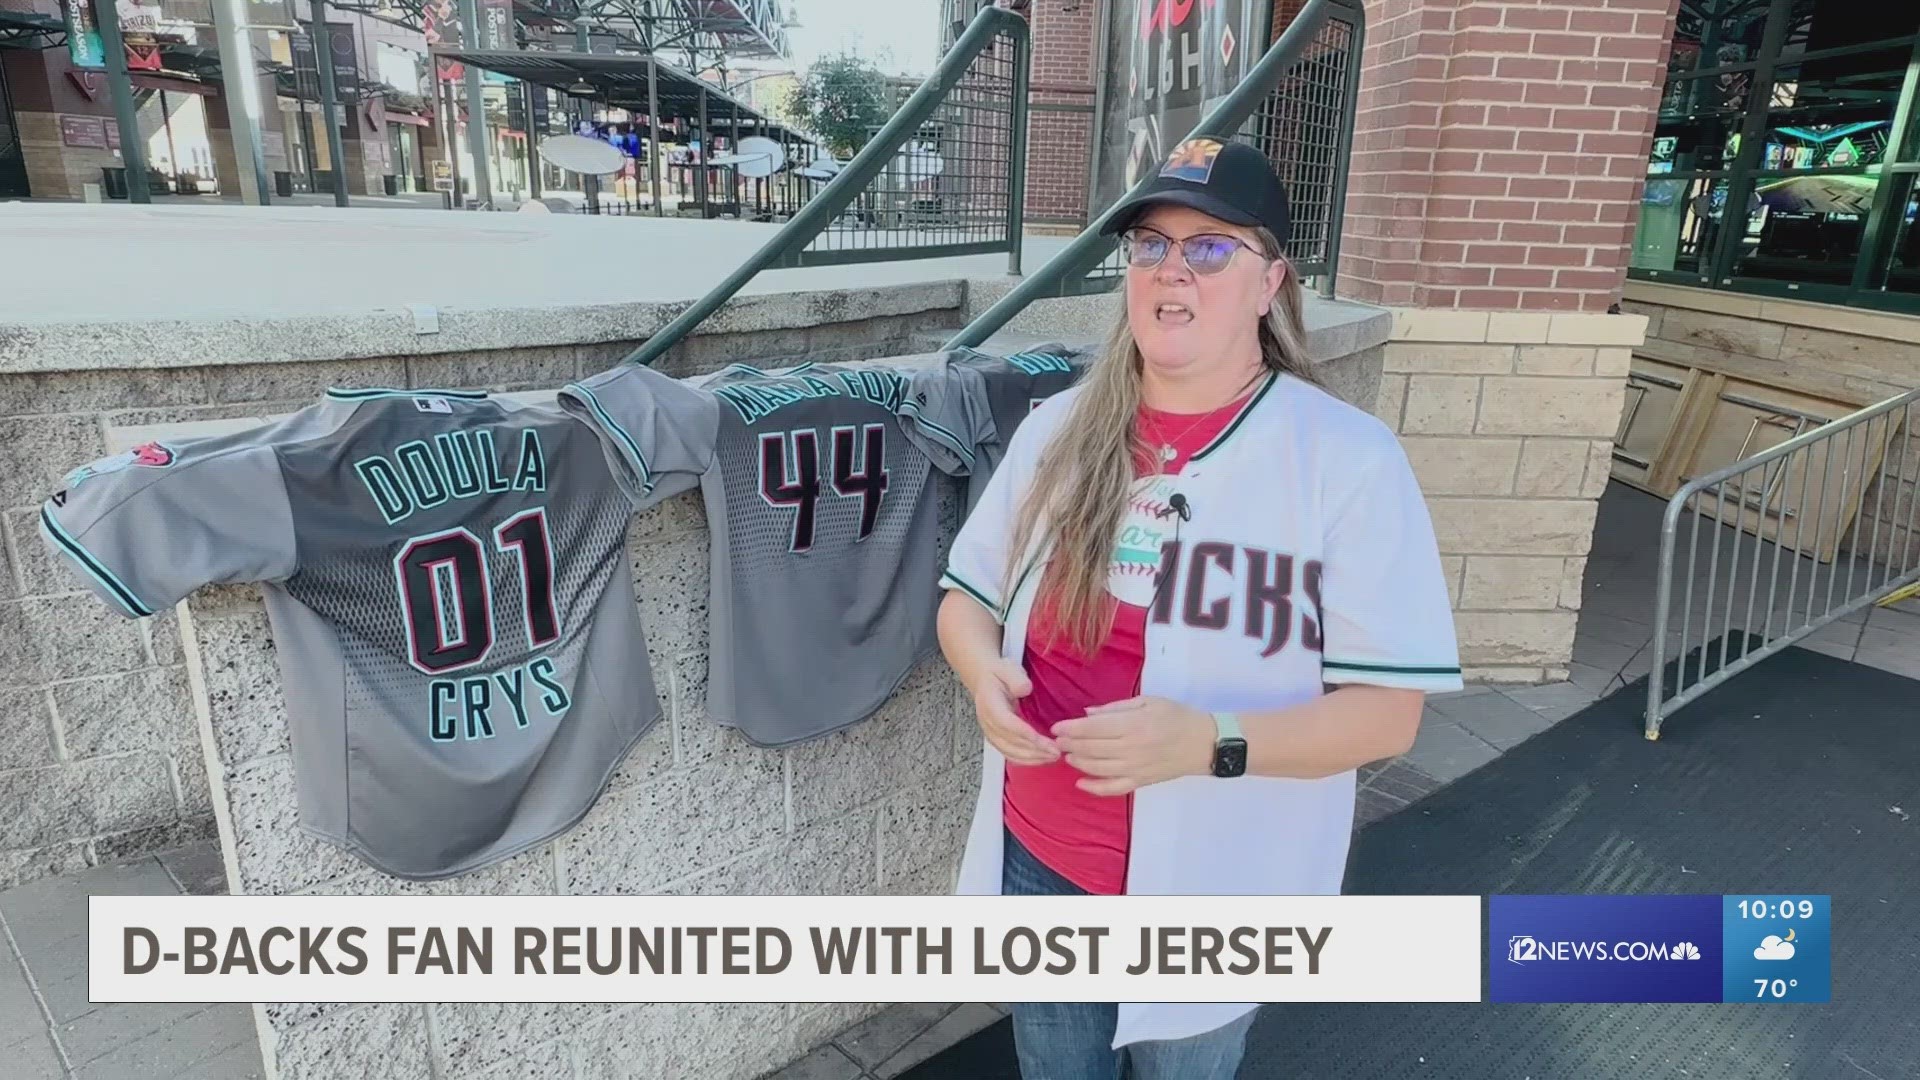 The custom jersey from her late mom is now officially retired and will be hung up at home.